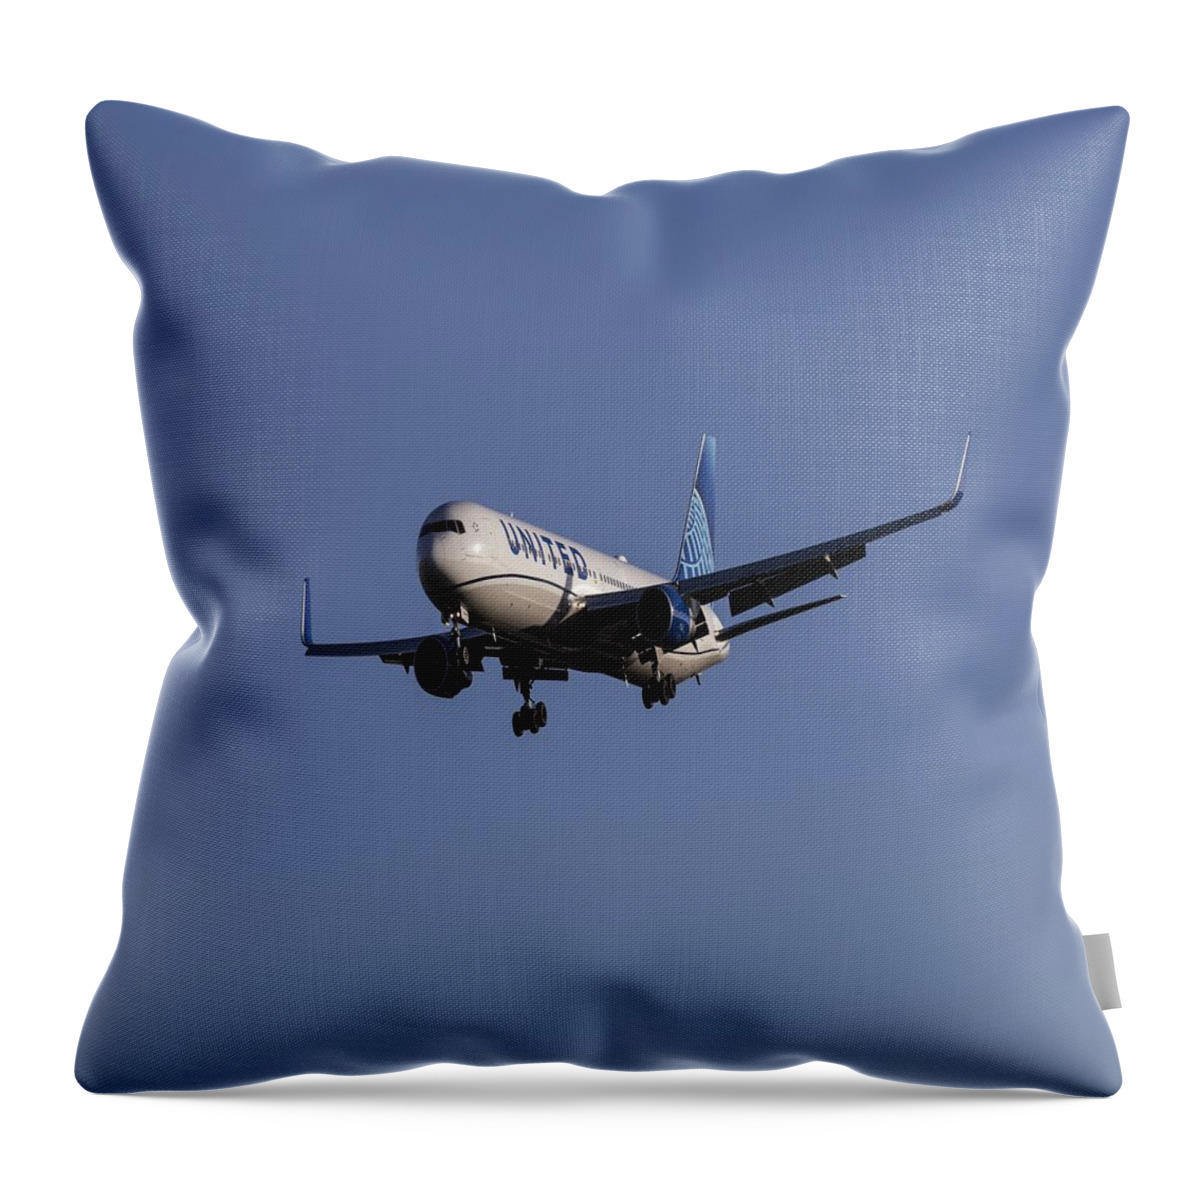  Boeing 767-322 Throw Pillow featuring the photograph United Airlines Boeing 767-322    X1 by David Pyatt